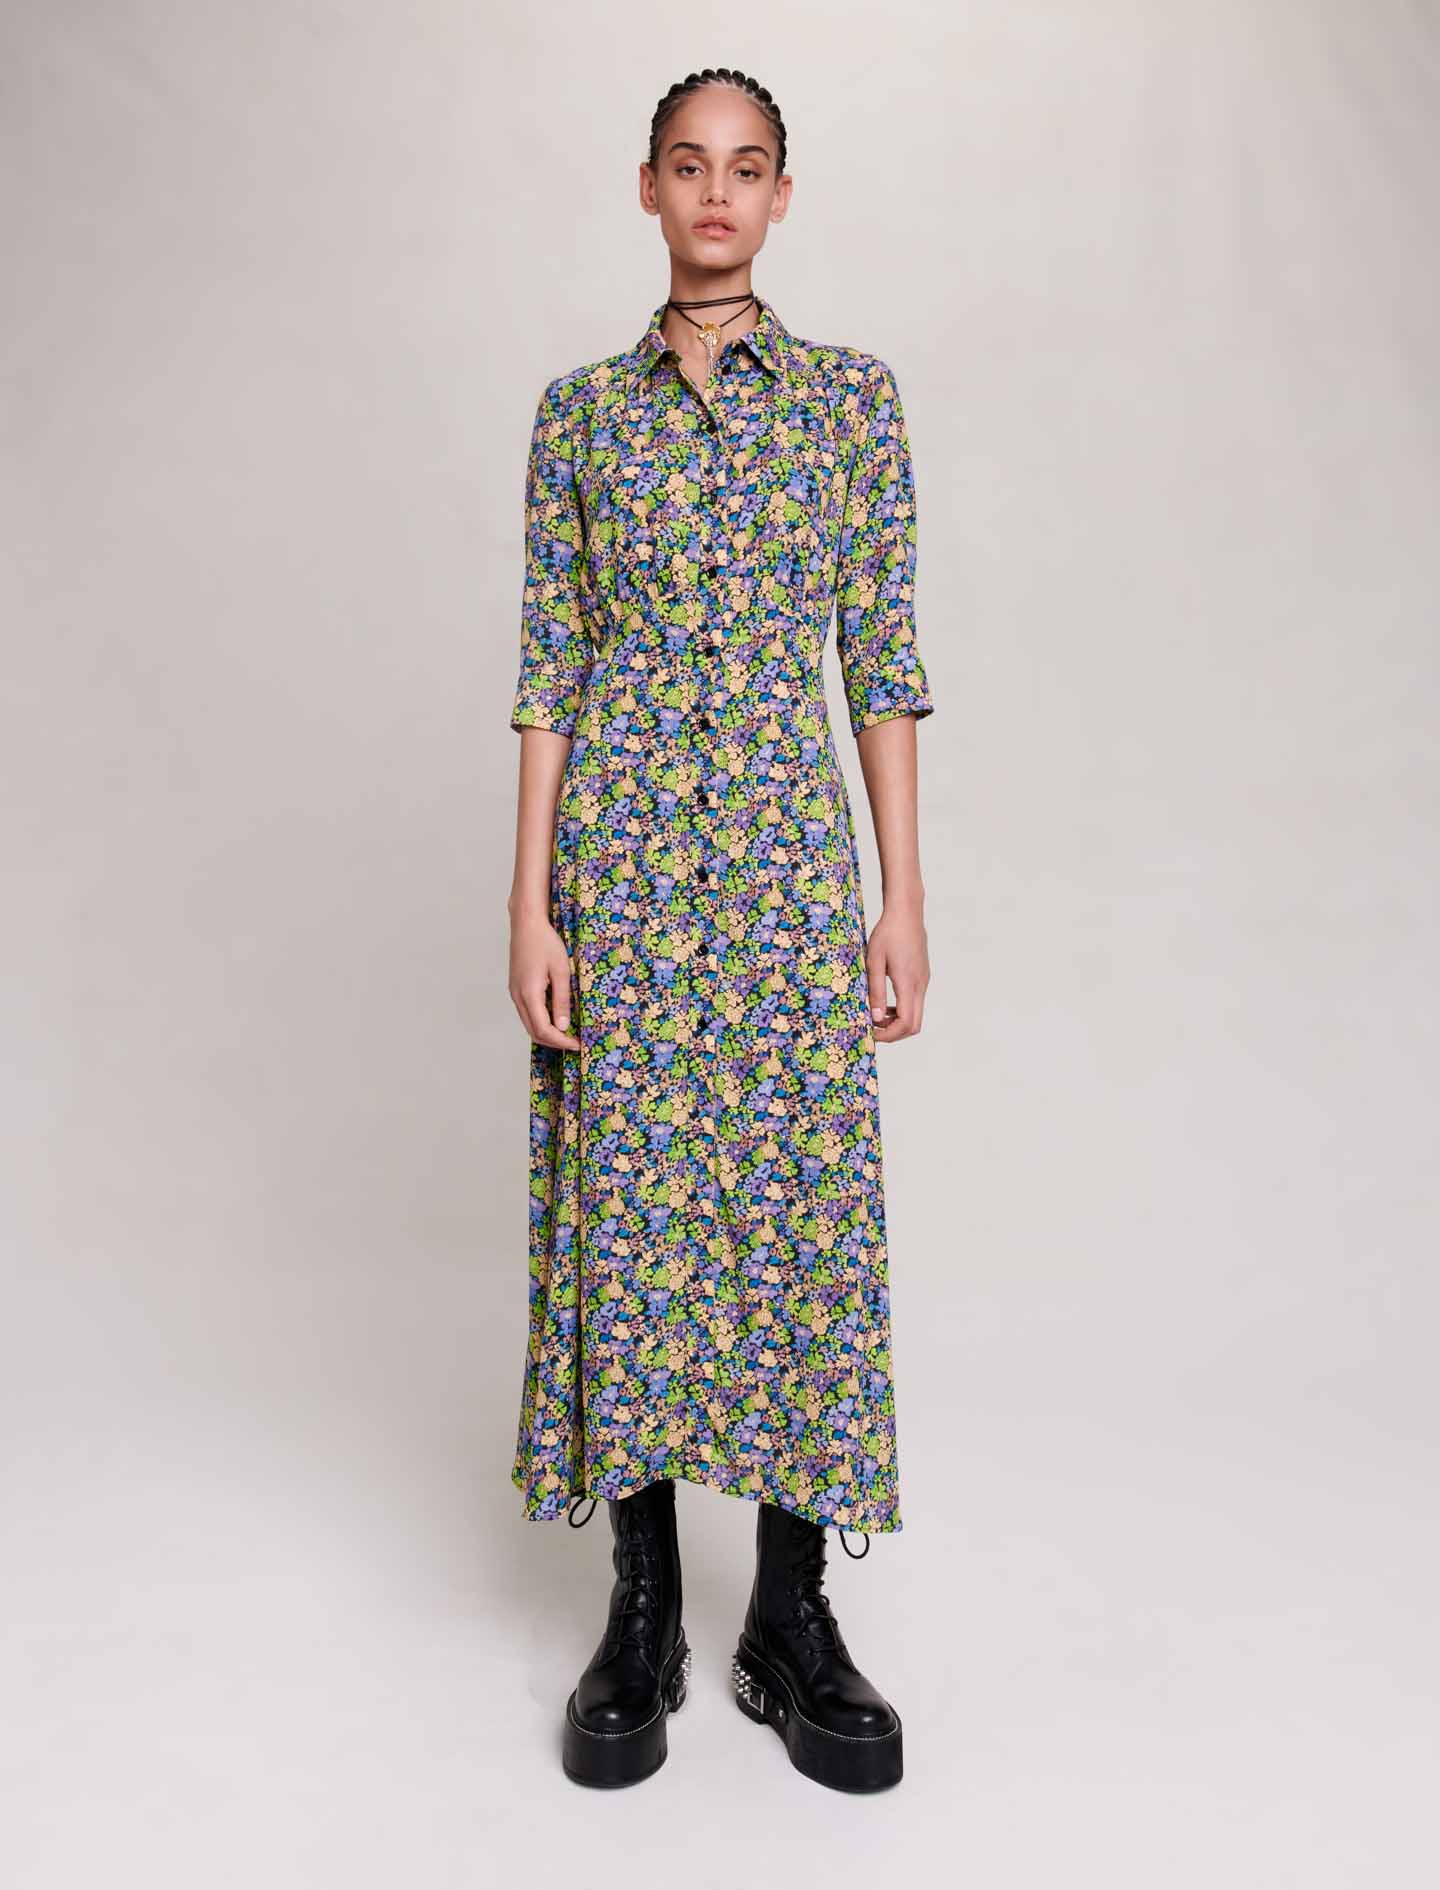 Maje Woman's polyester Long floral dress for Fall/Winter, in color Primroses Multico Print /